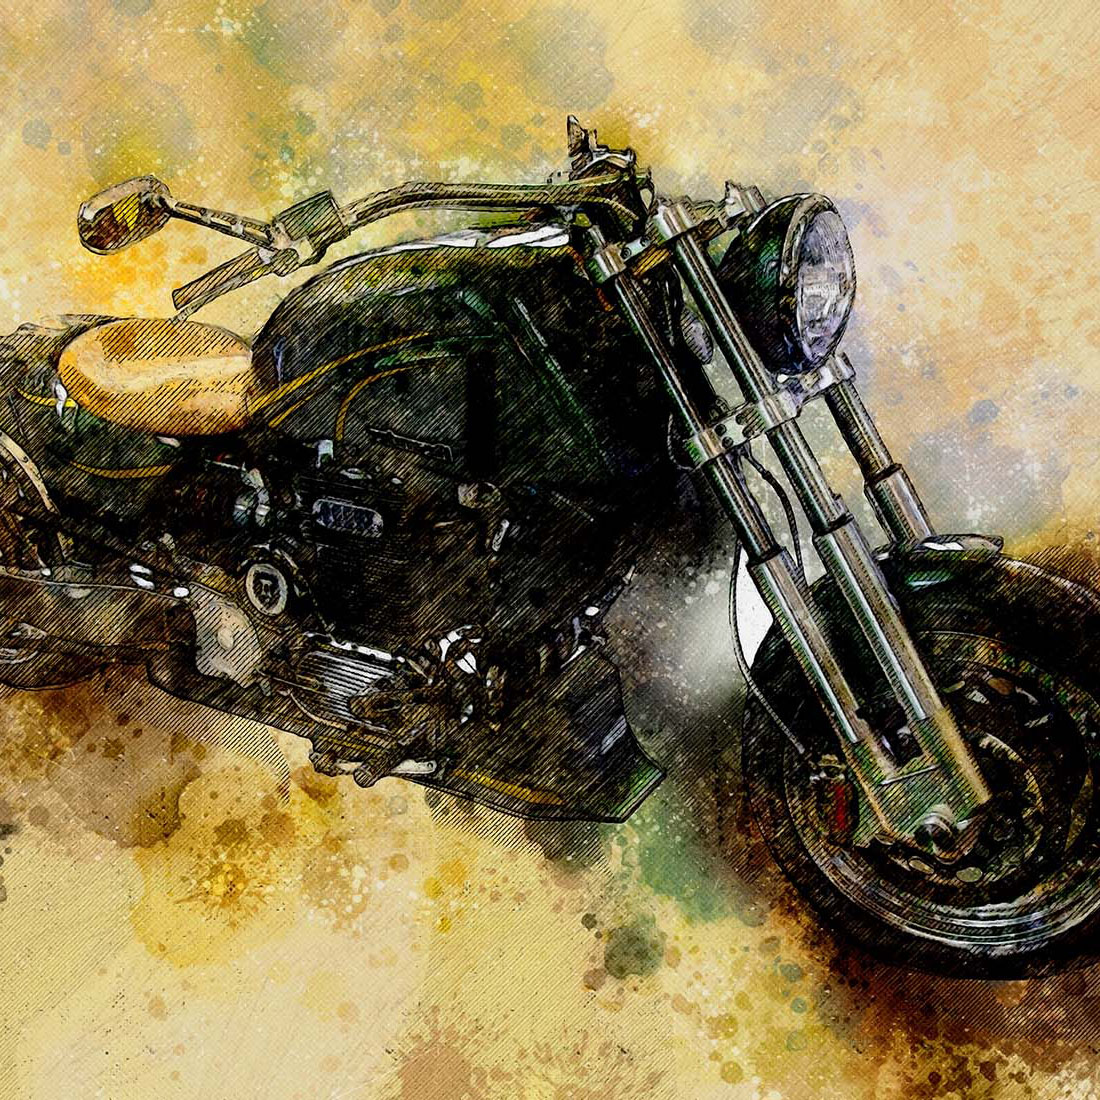 CLASSIC MOTORCYCLES – Bundle Of 72 HQ 300 dpi Graphics Ready To Print preview image.